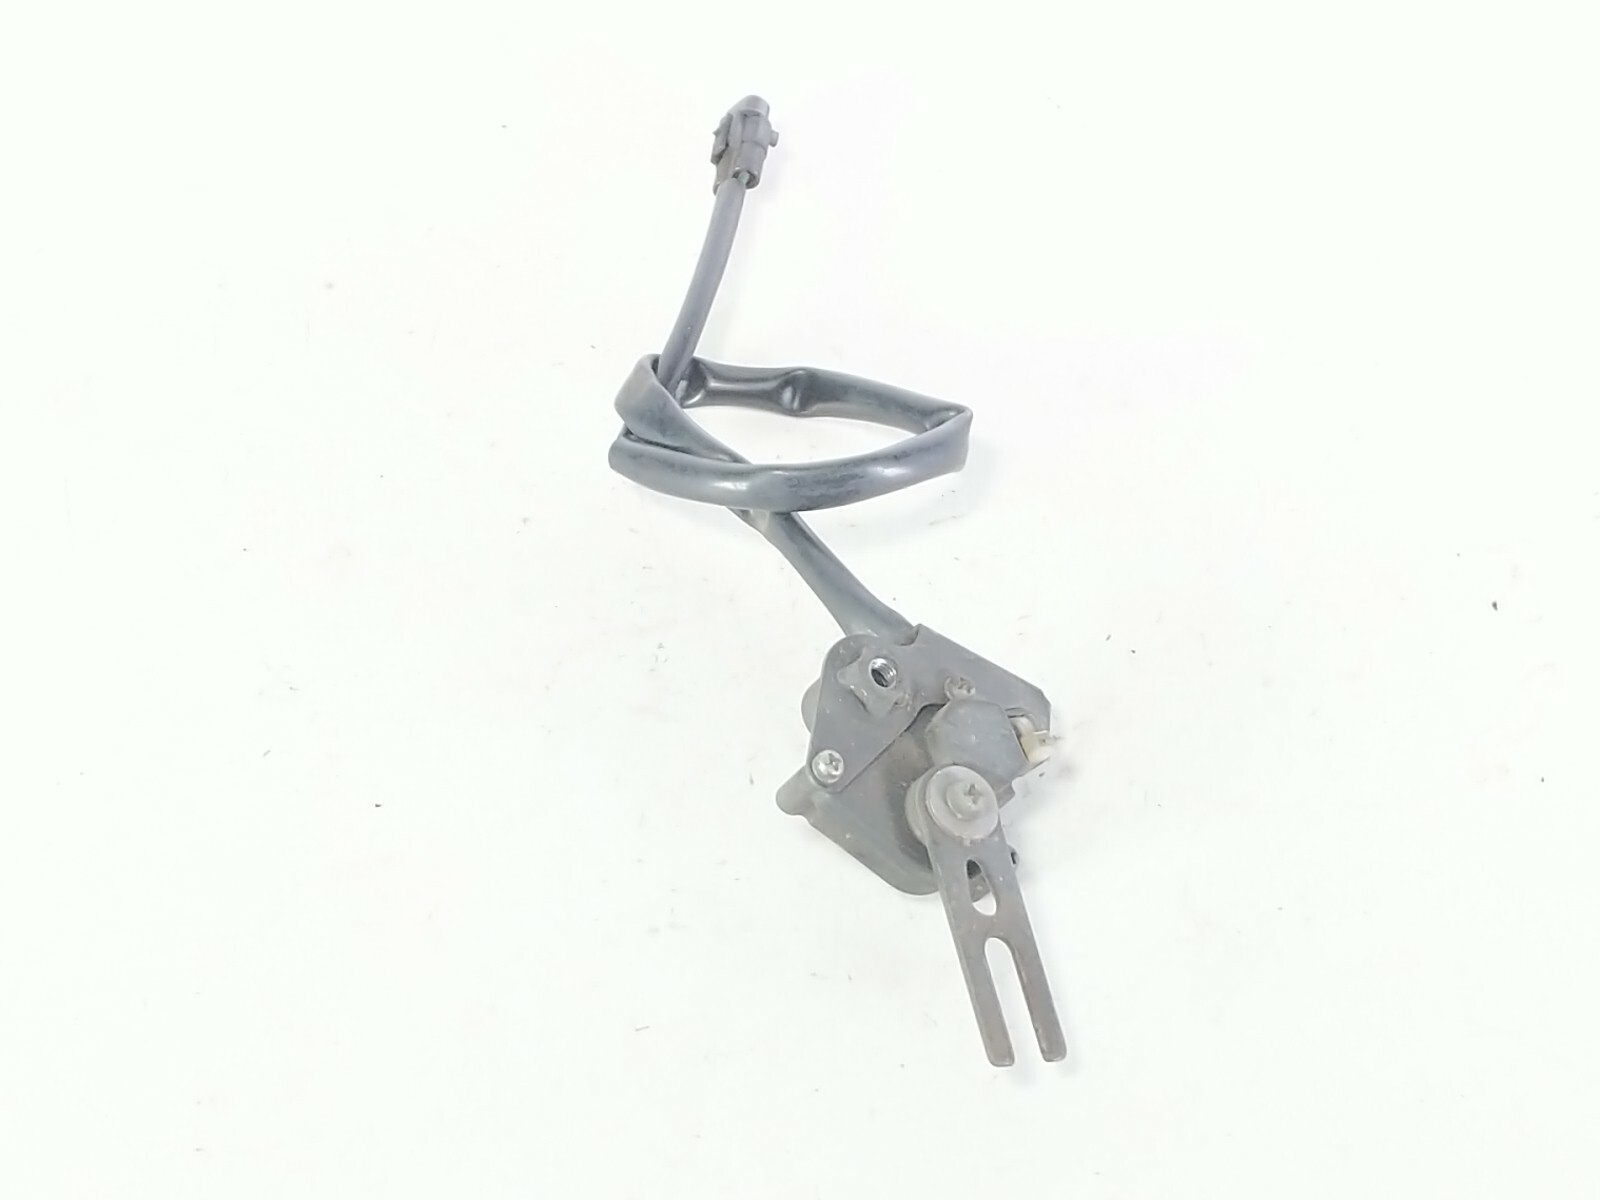 08 09 Kawasaki Concours ZG1400 Side Kick Stand Saftey Switch TRSH RO $7.95